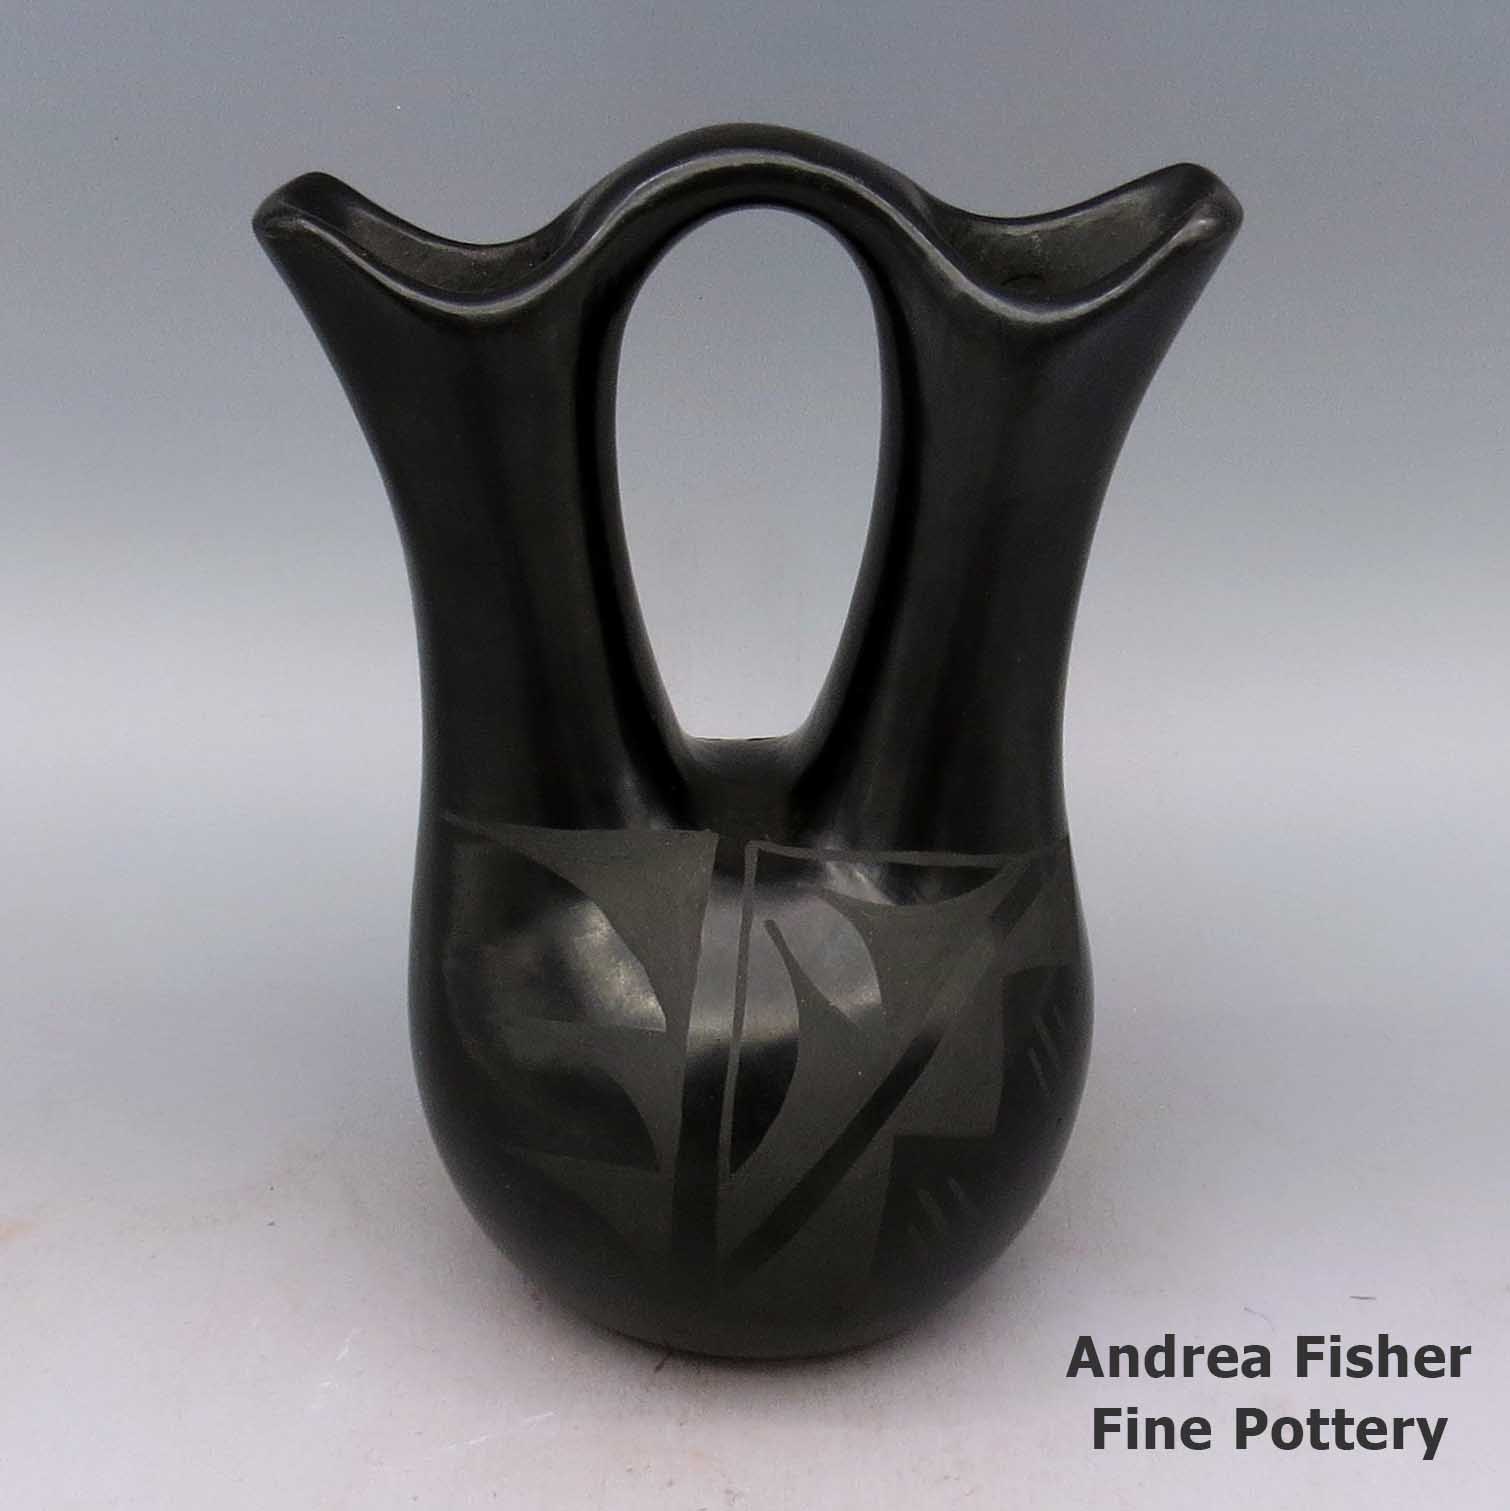 Black-on-black wedding vase decorated with a geometric design made by Unknown of Santa Clara